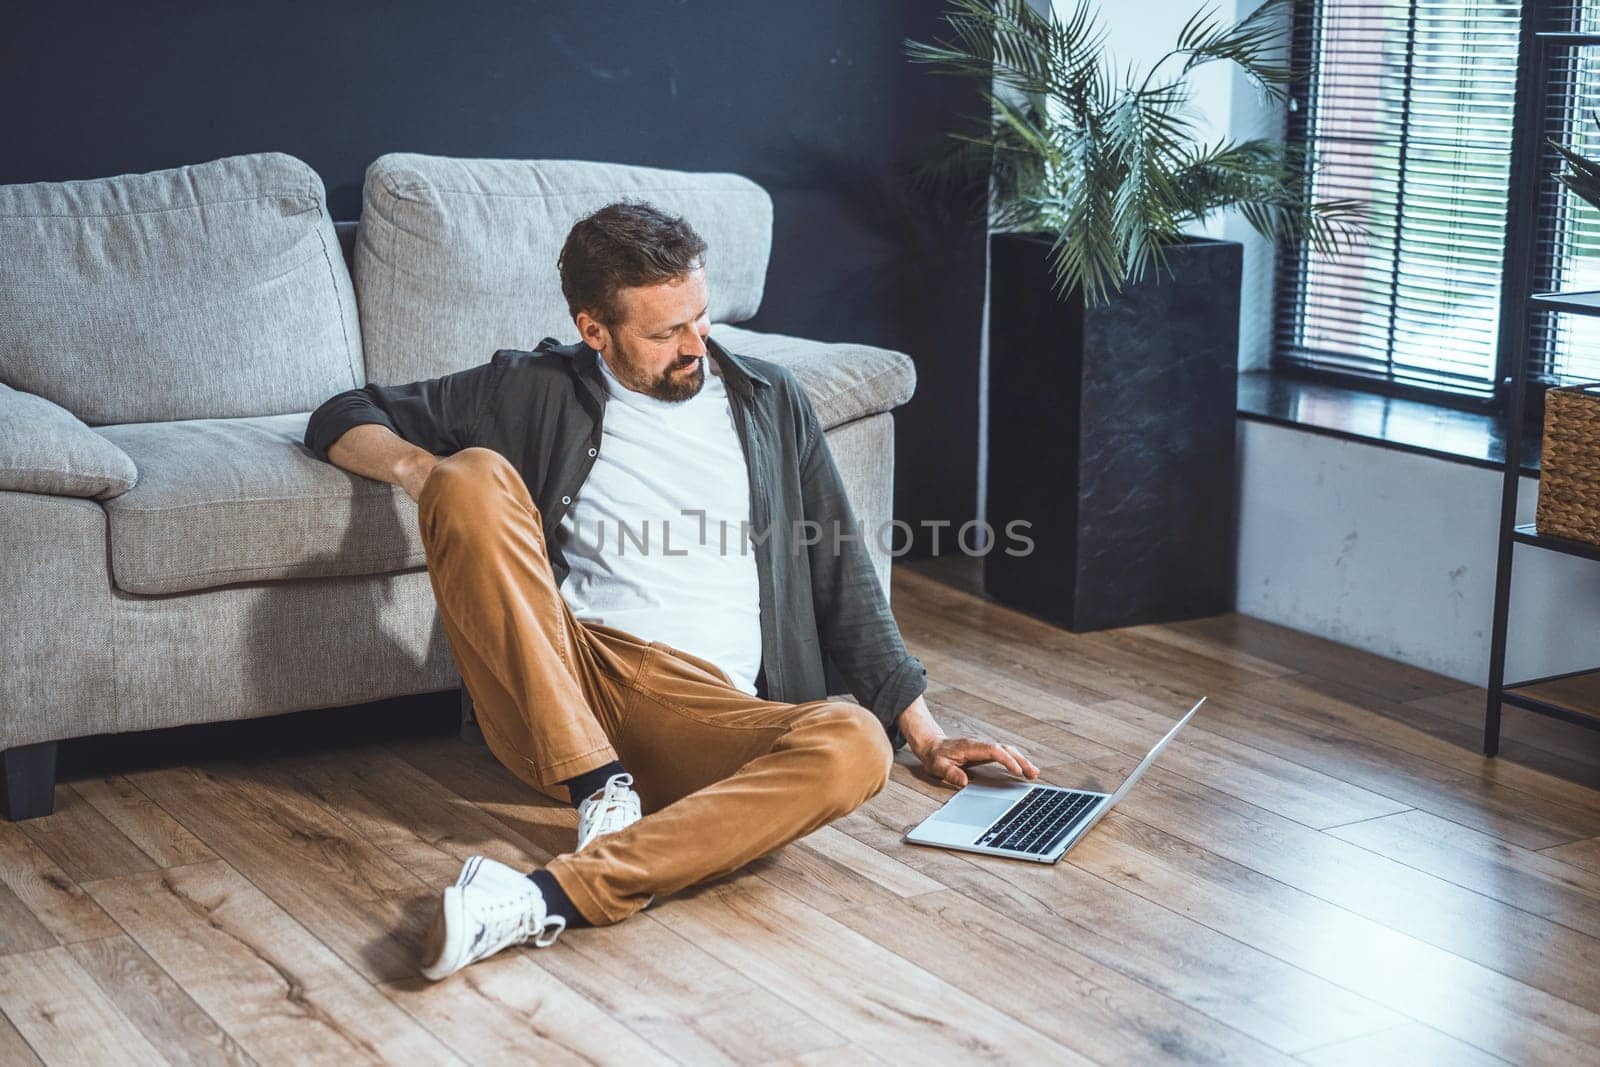 Lazy and handsome man spending time home. Man sitting comfortably, browsing internet on laptop. With relaxed posture and casual vibe, he online search, possibly looking for information. High quality photo